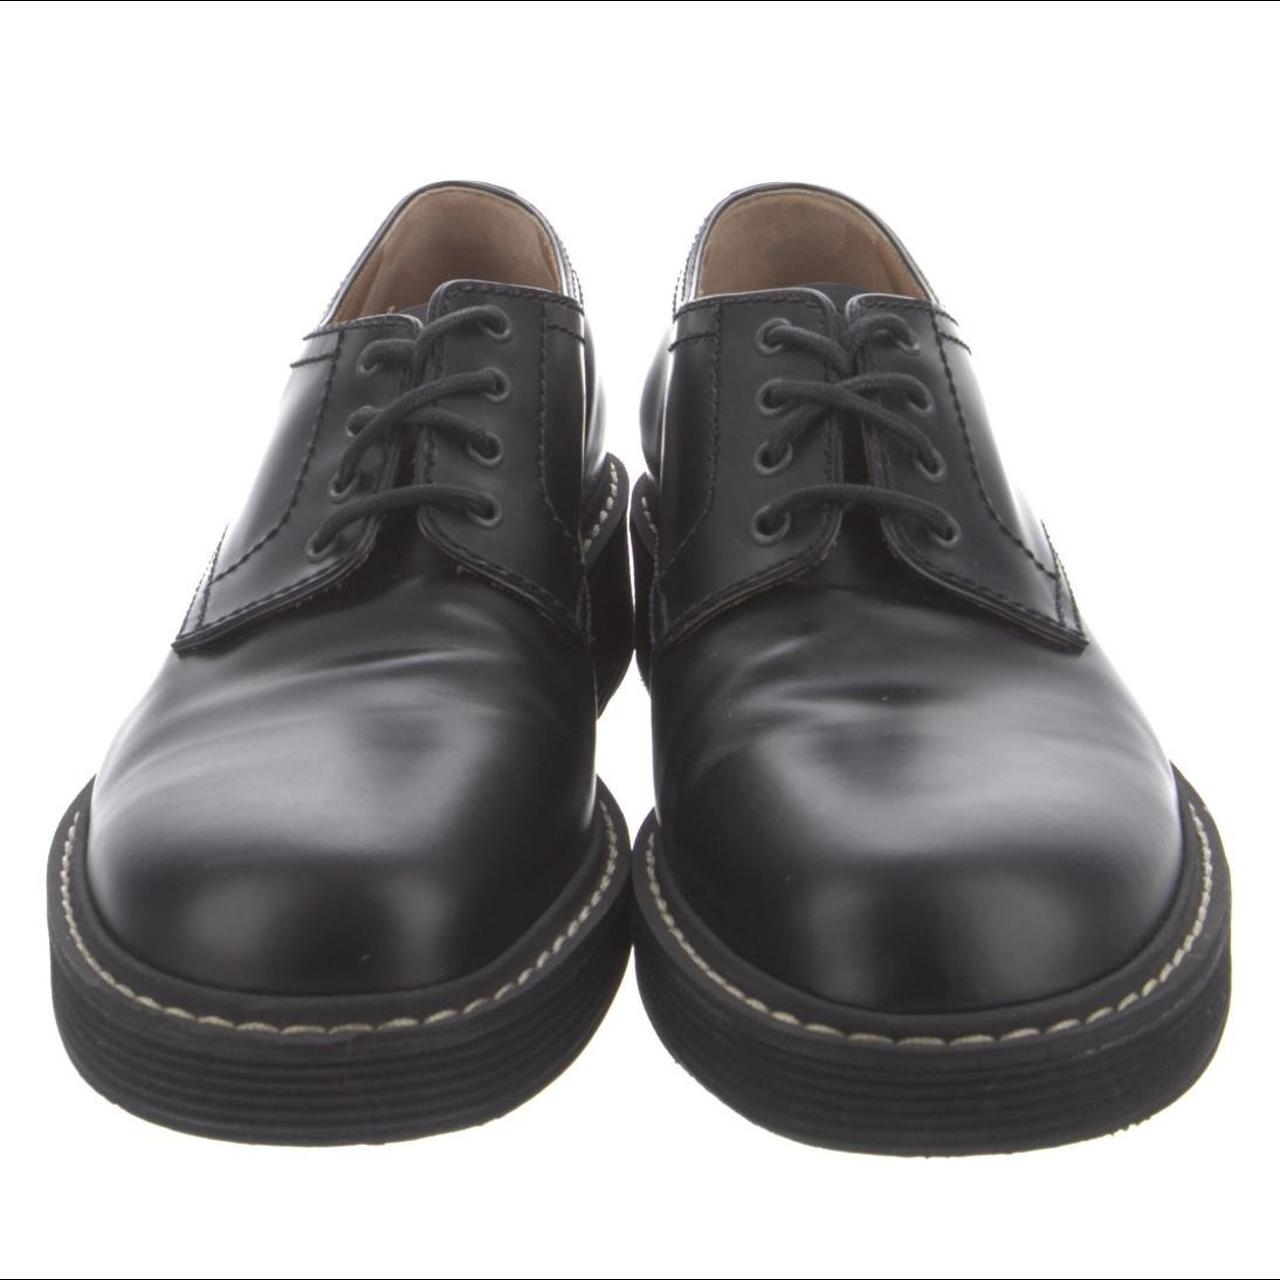 Product Image 1 - marni leather derby shoes
great condition
size: